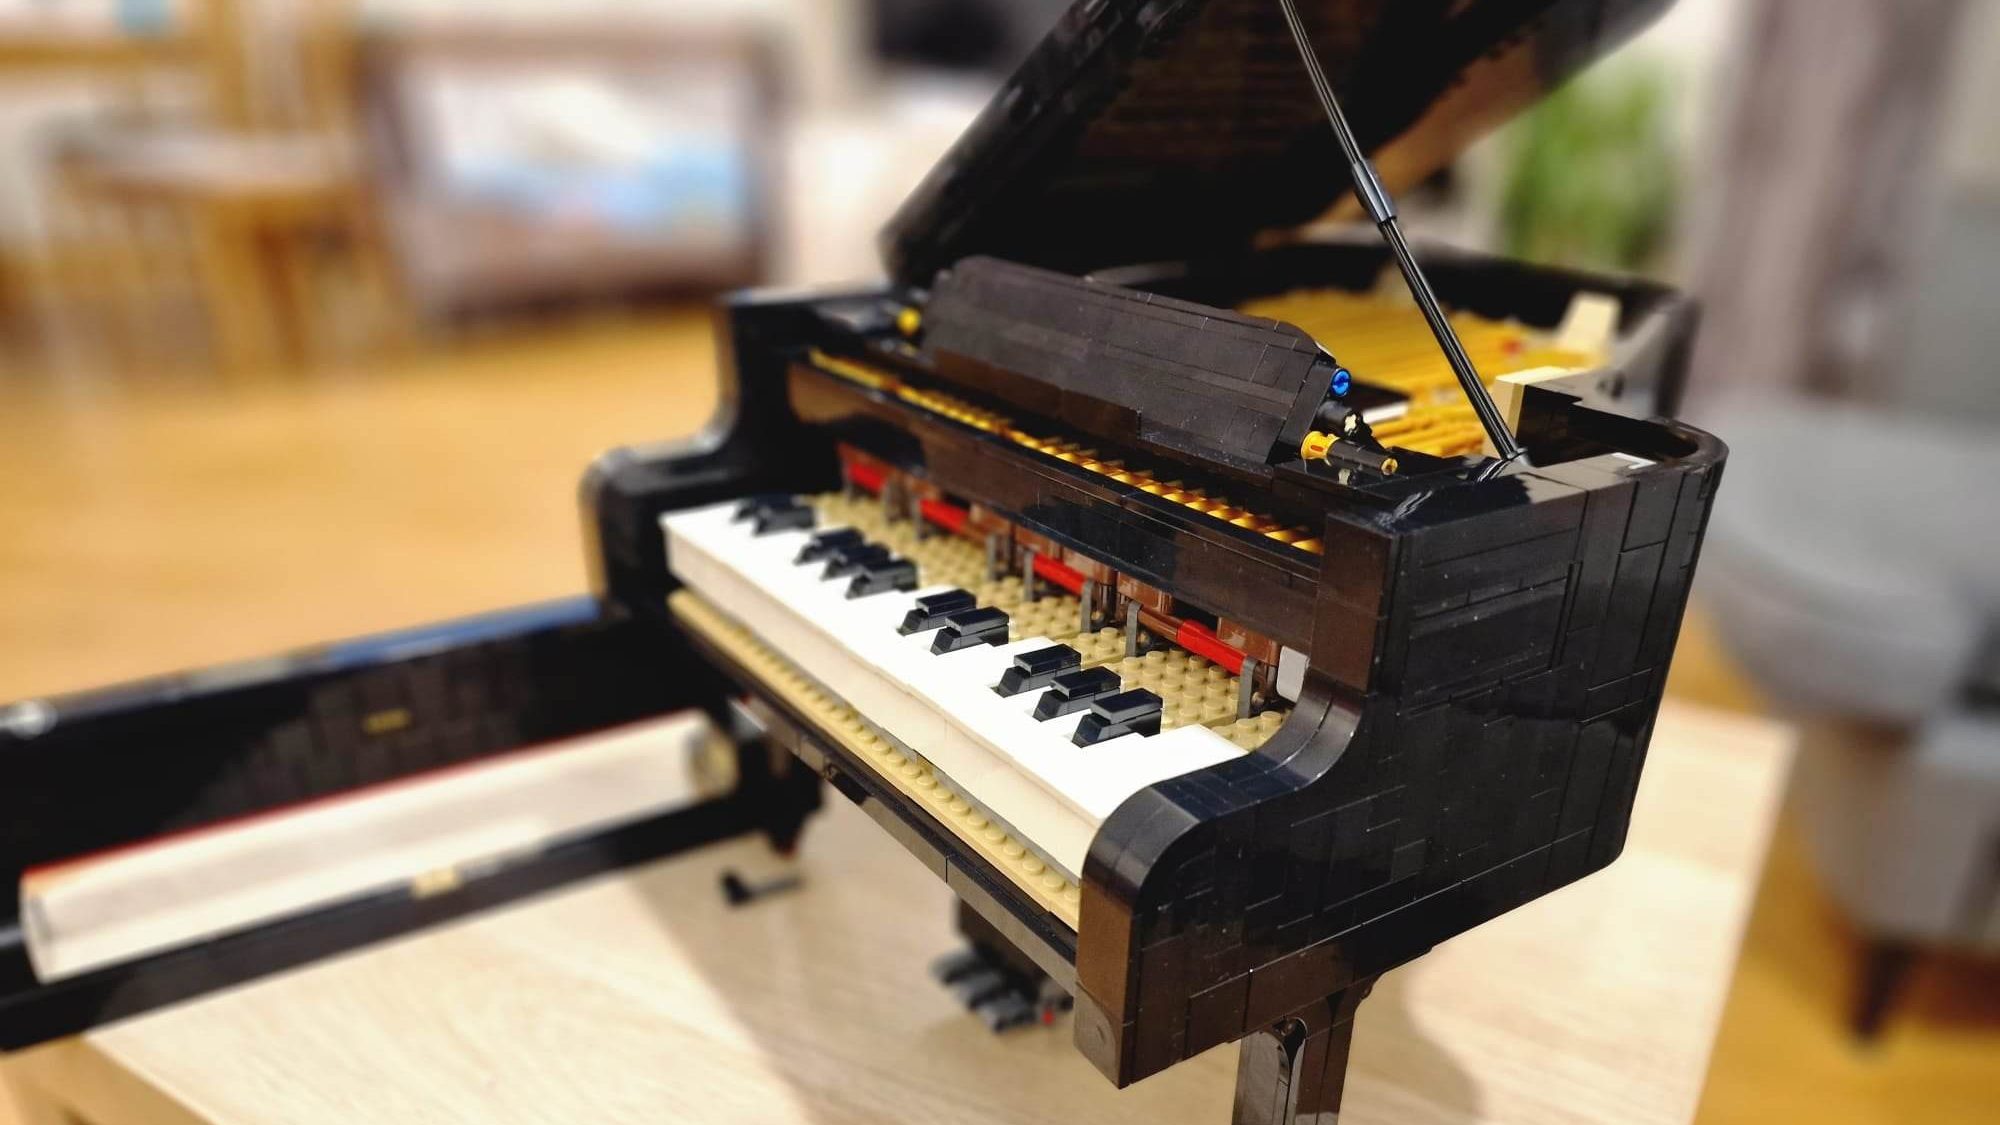 A playable piano to assemble yourself from Lego